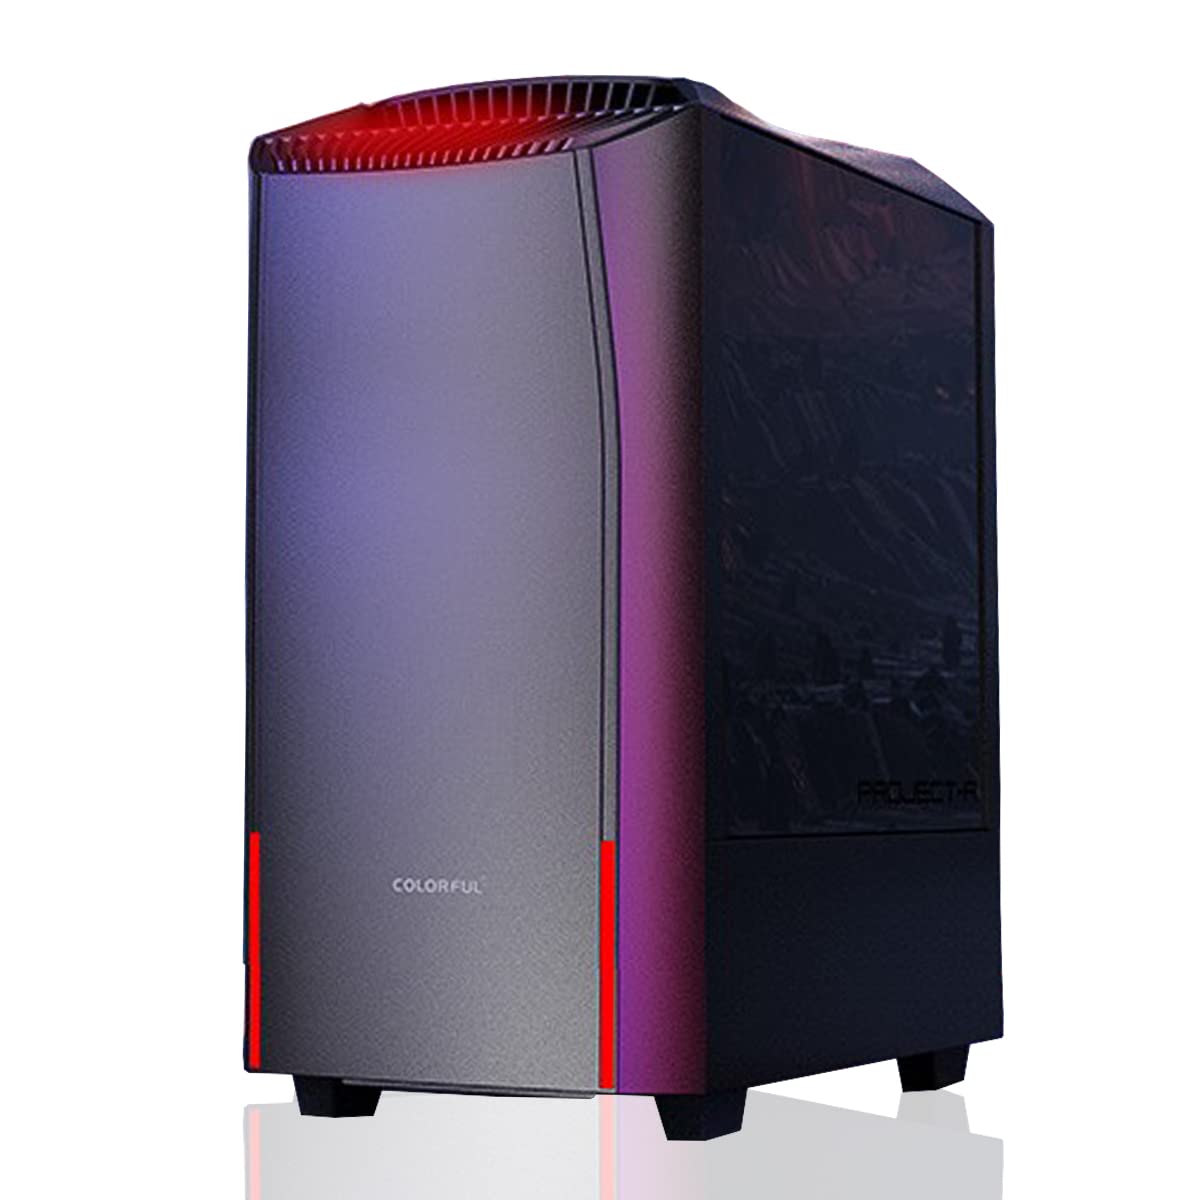 COLORFUL Desktop Computer PC, Intel Core i5-10400 up to 4.3GHz, GTX1660S 6G Graphics Card,16GB DDR4 2666MHz RAM, 500GB M.2 SSD,12cm Cool Fan,Windows 10